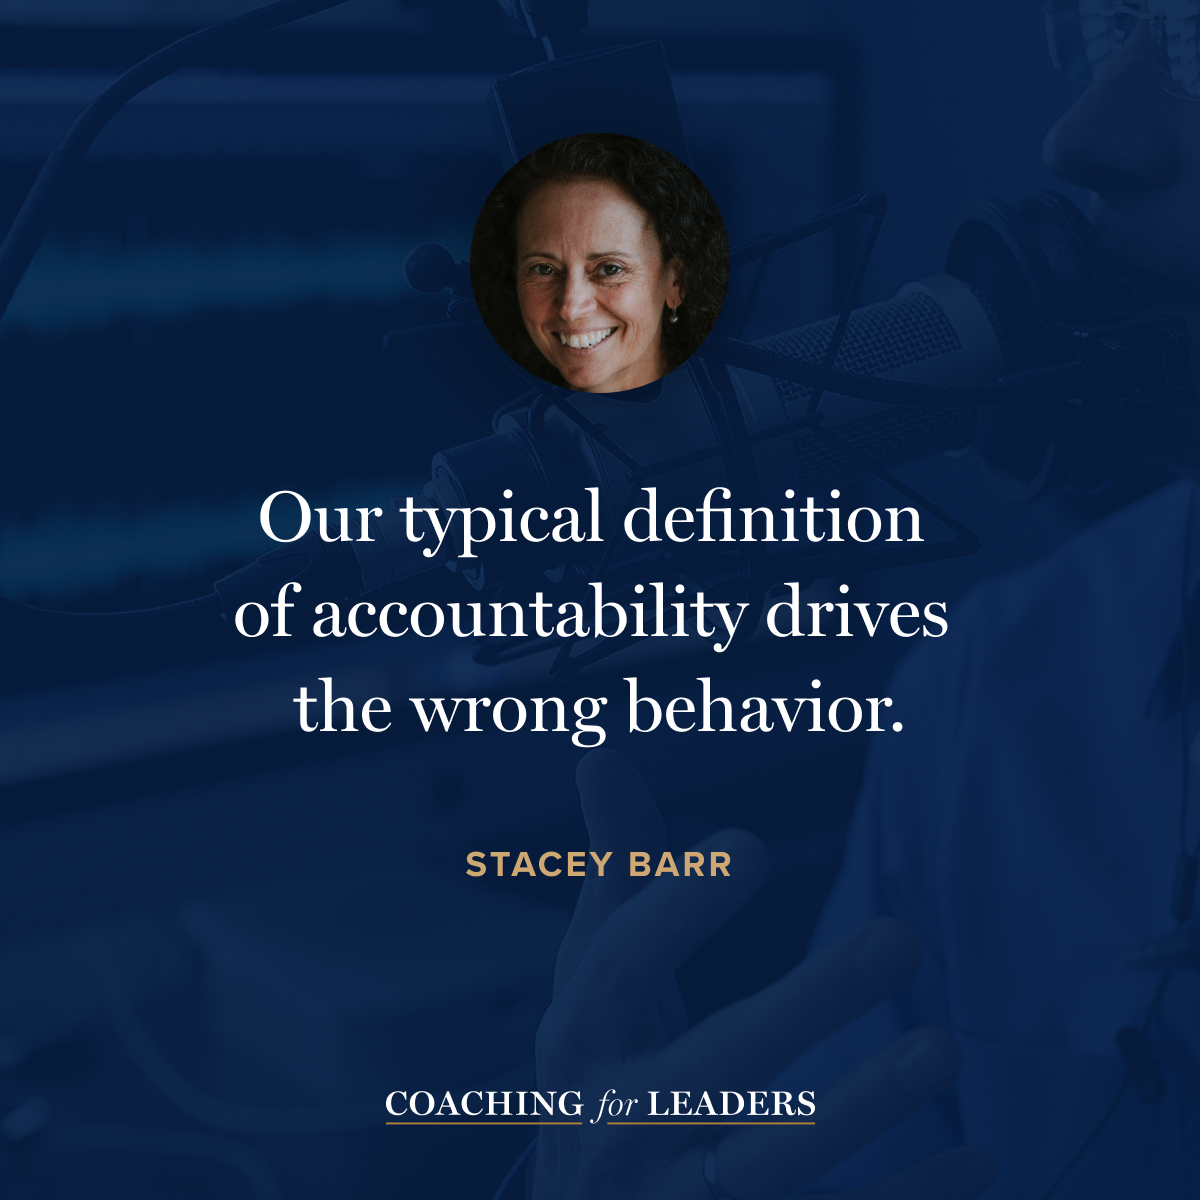 https://coachingforleaders.com/podcast/hold-people-accountable-stacey-barr